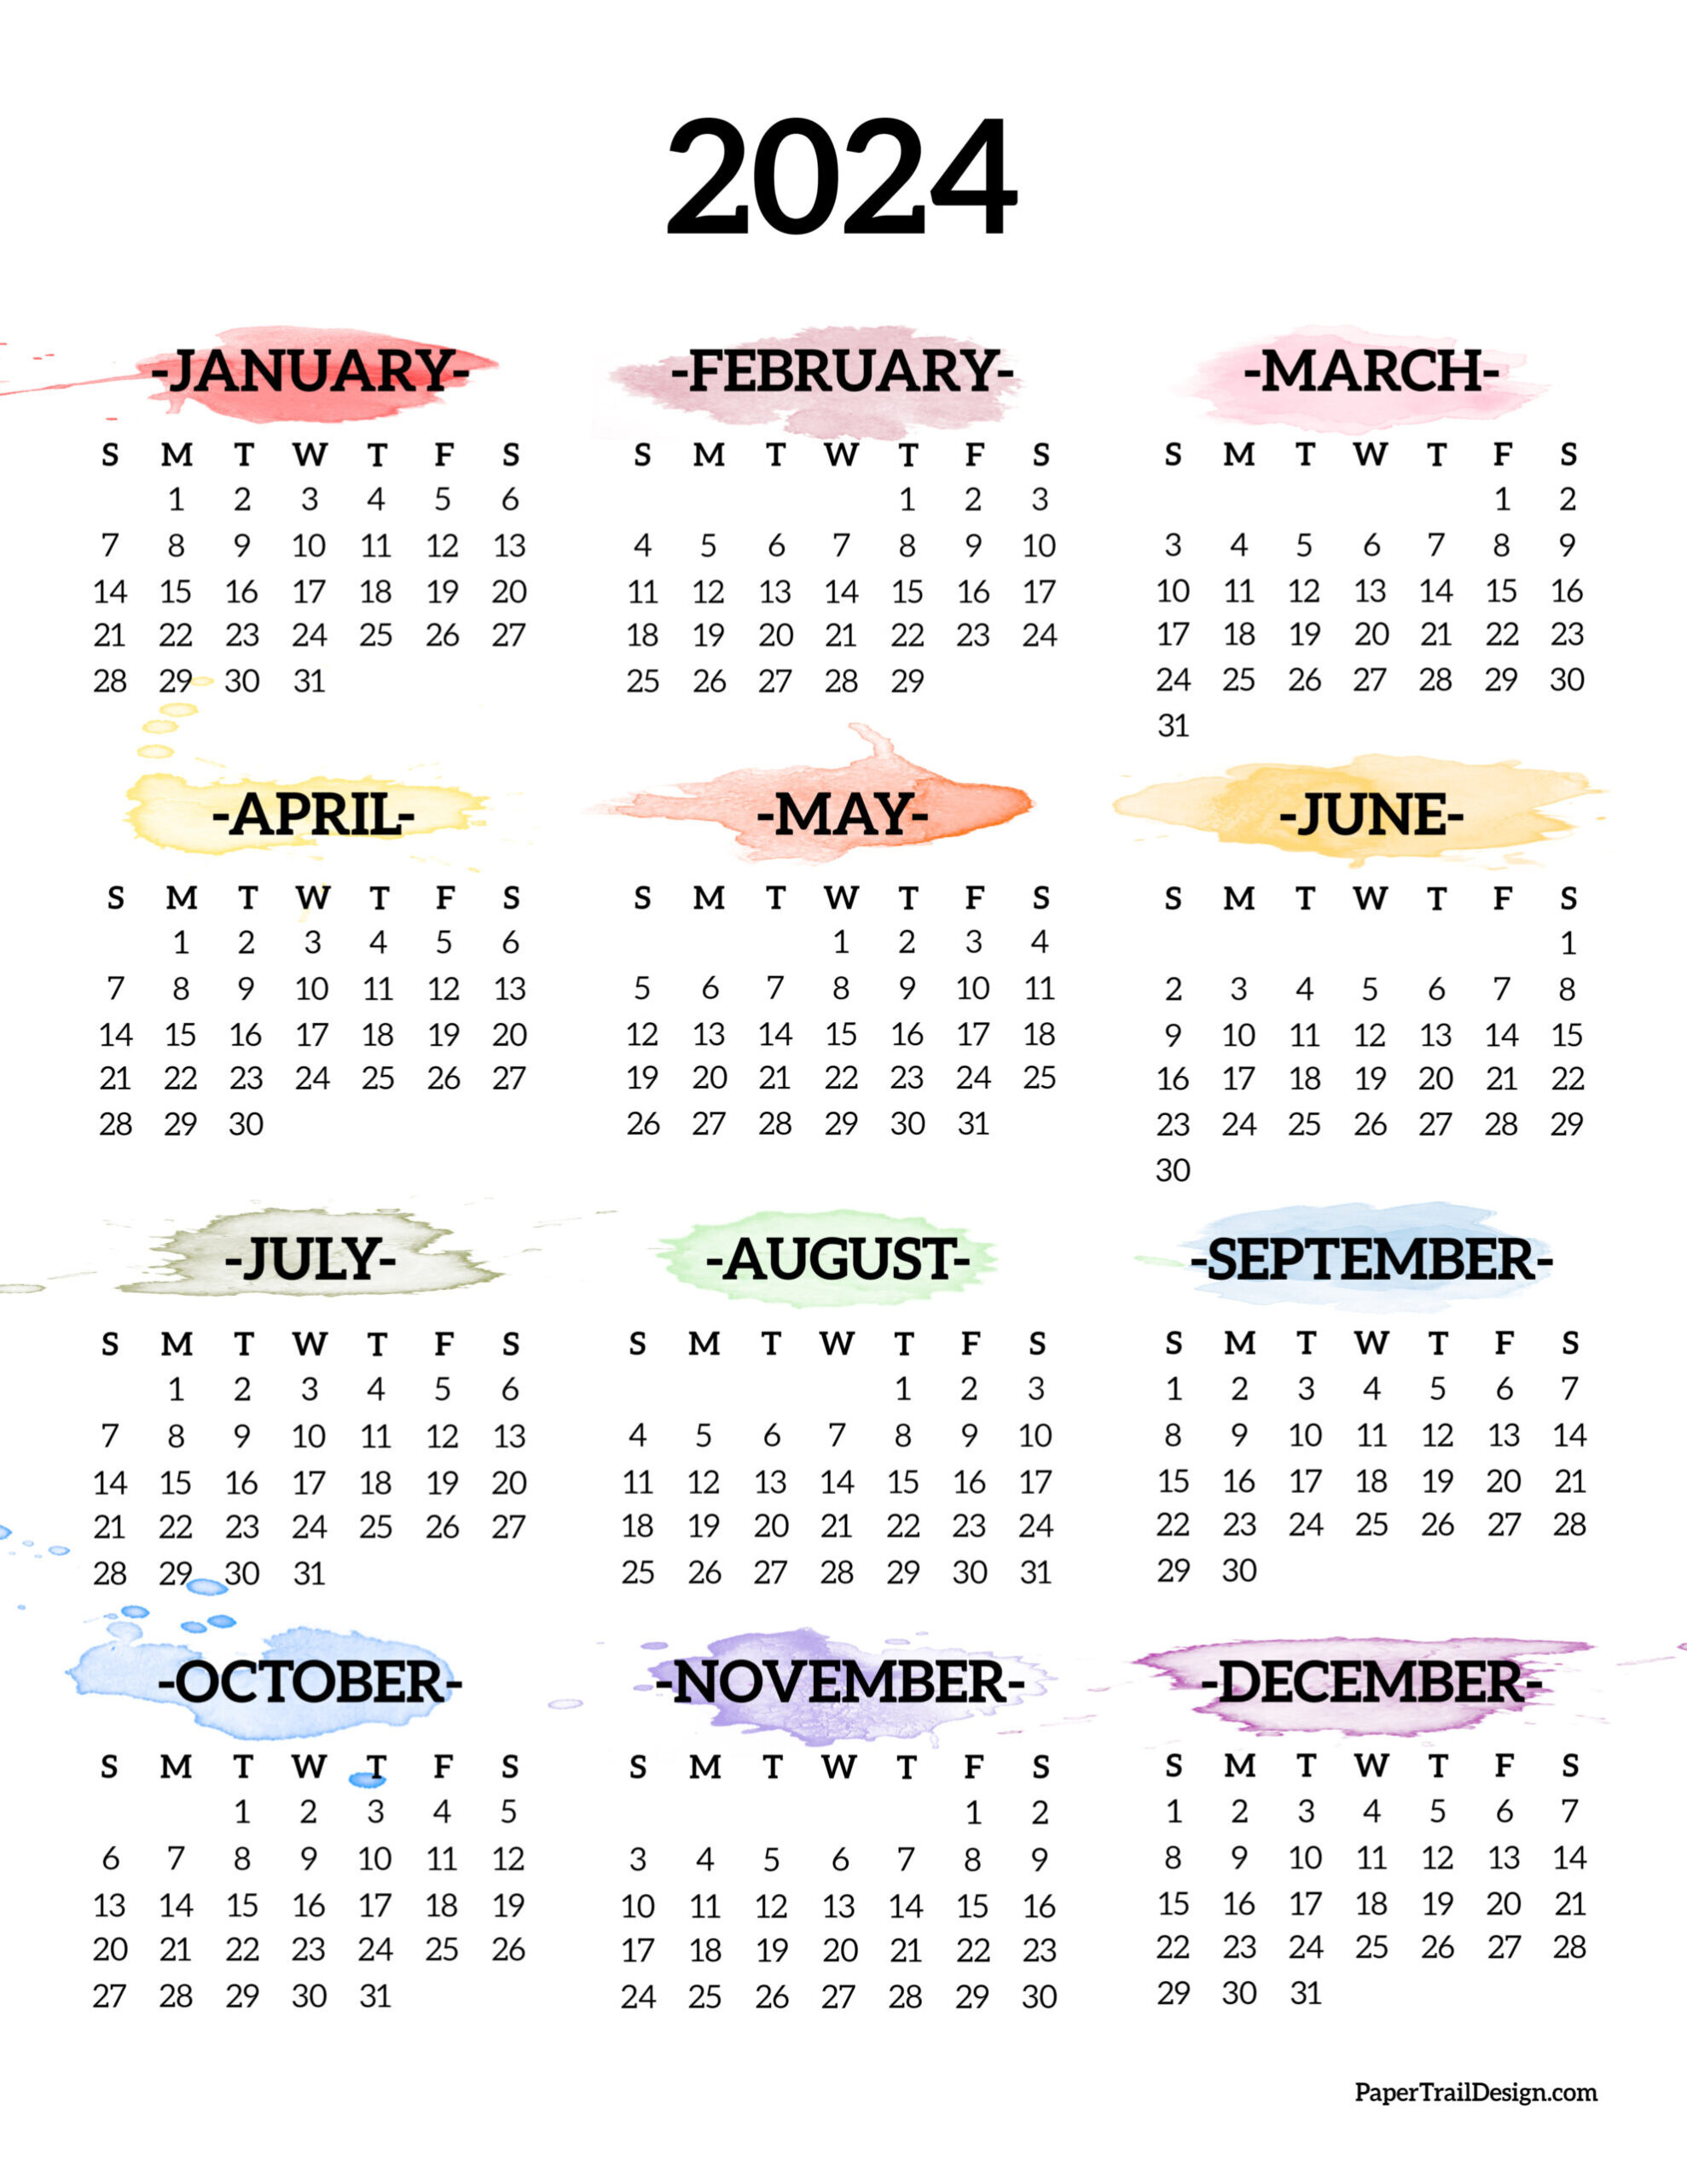 Calendar 2024 Printable One Page - Paper Trail Design | 2024 Yearly Calendar